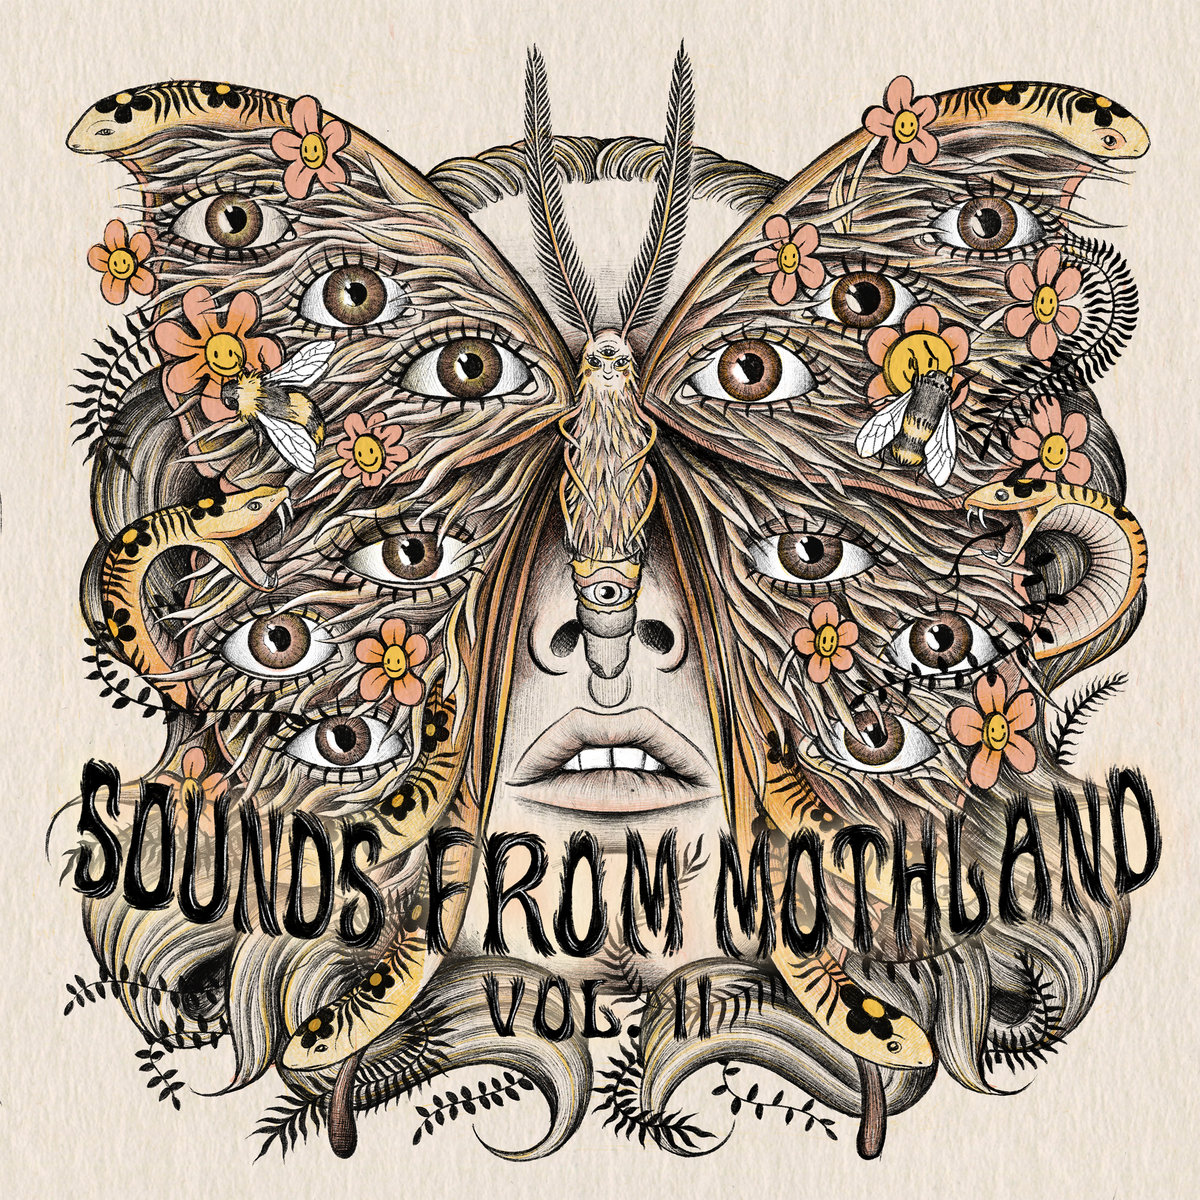 Various, Sounds From Mothland, Vol. II: REVIEW